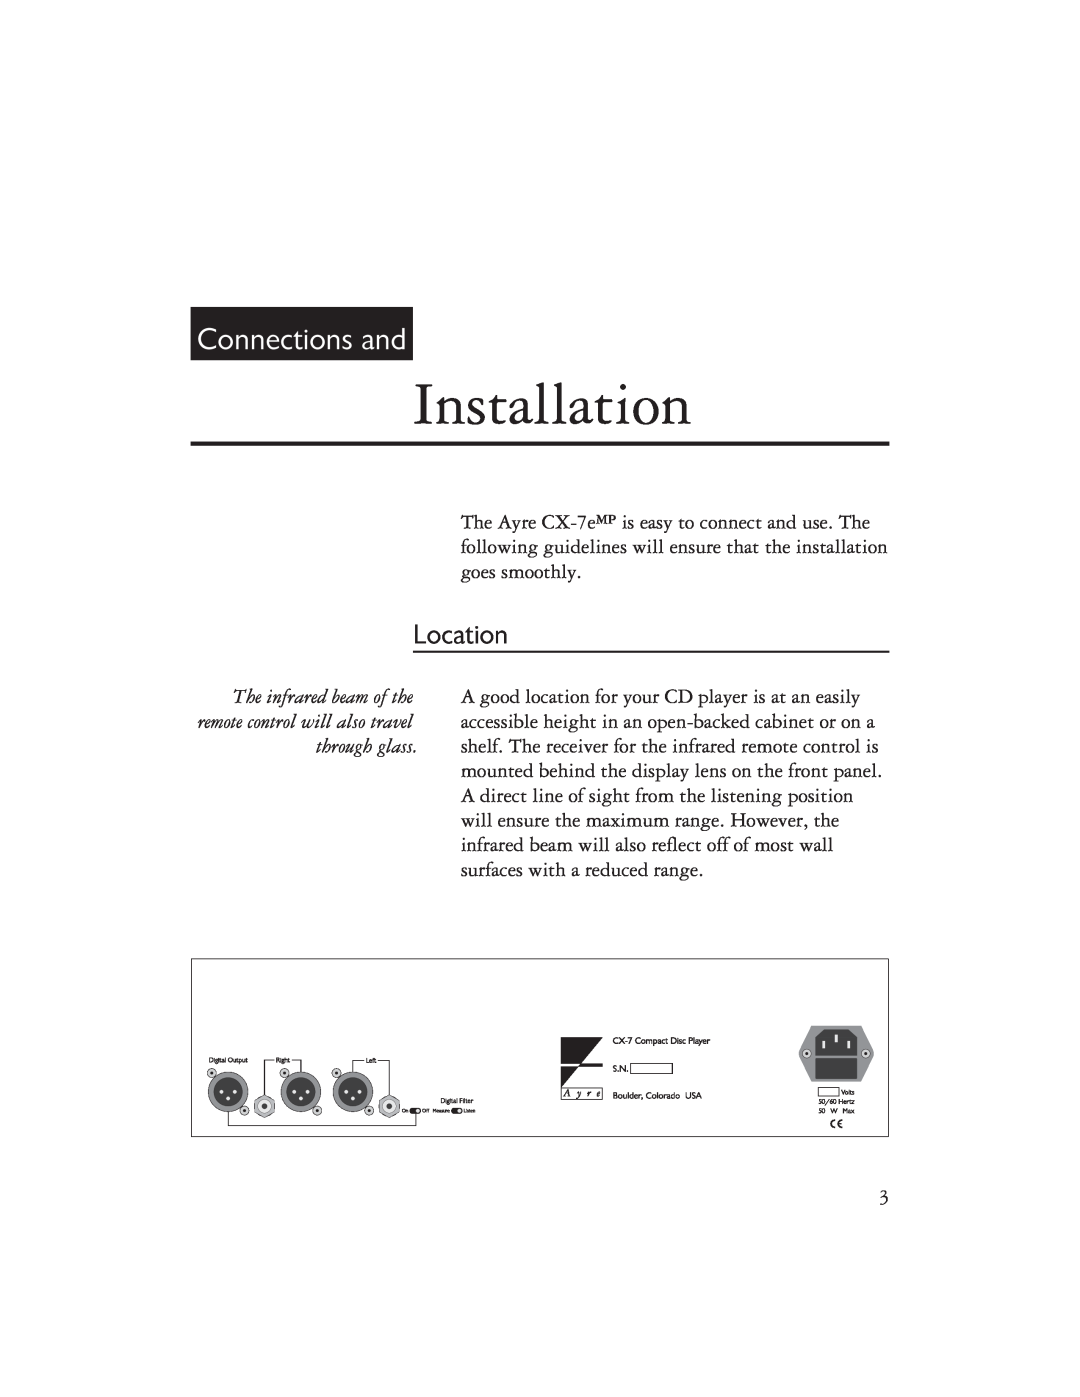 Ayre Acoustics CX-7EMP owner manual Installation, Connections and, Location 